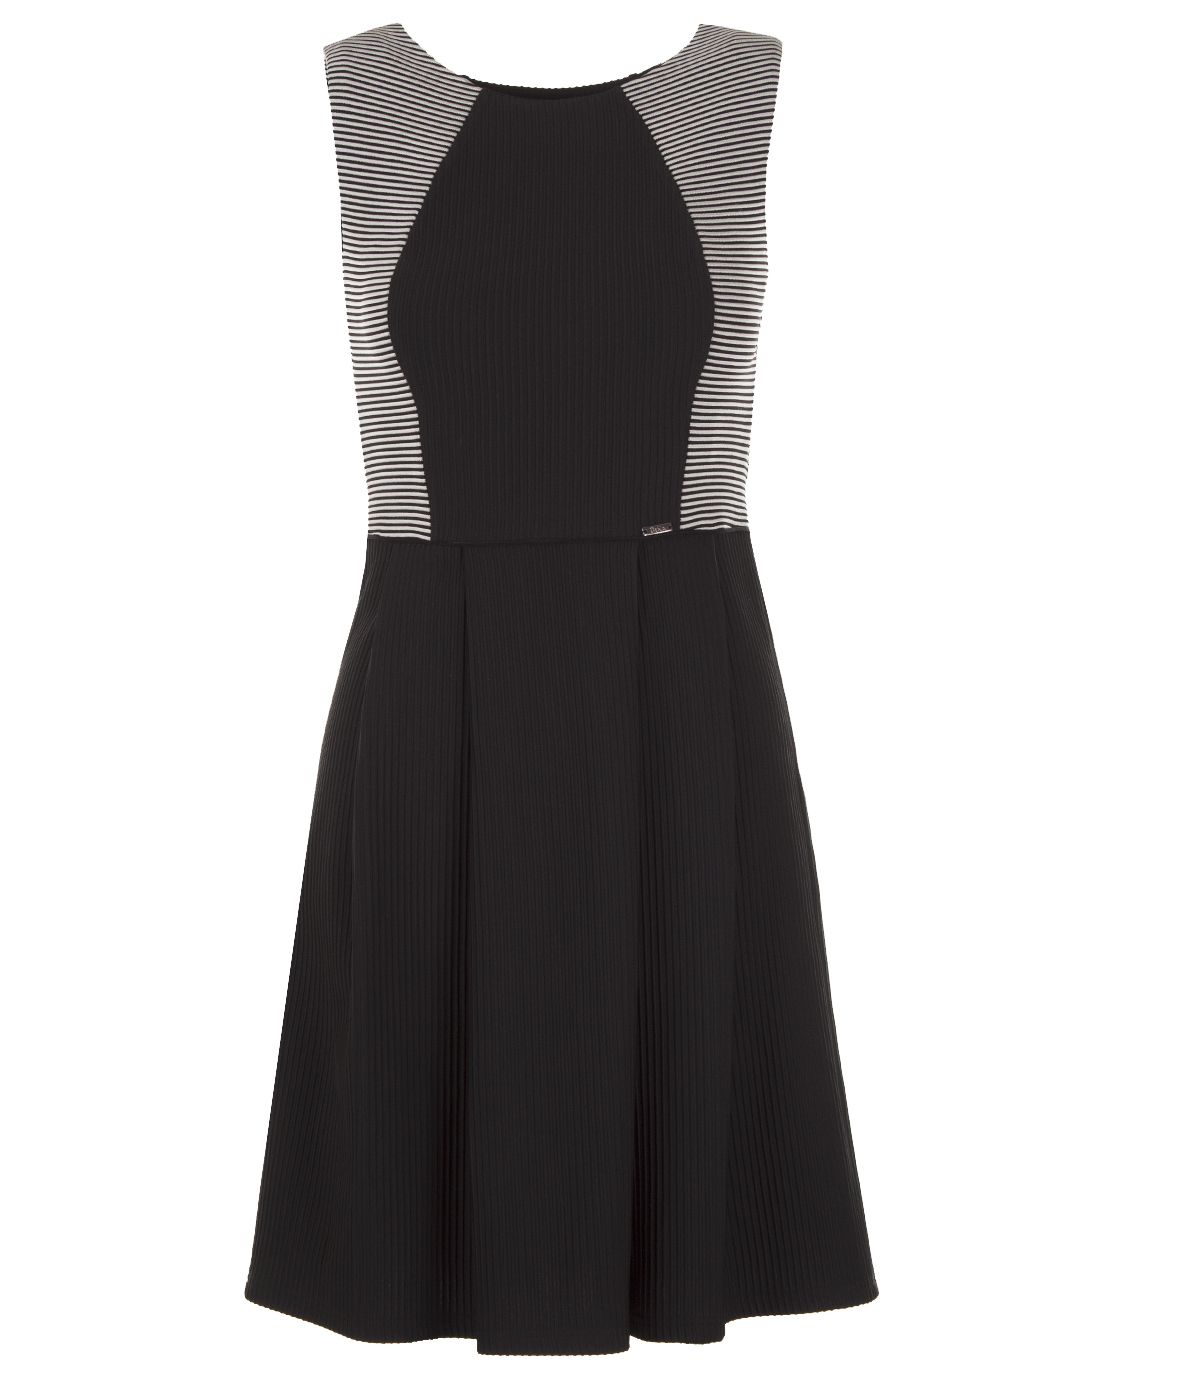 Two-toned sleeveless dress with rayon 0